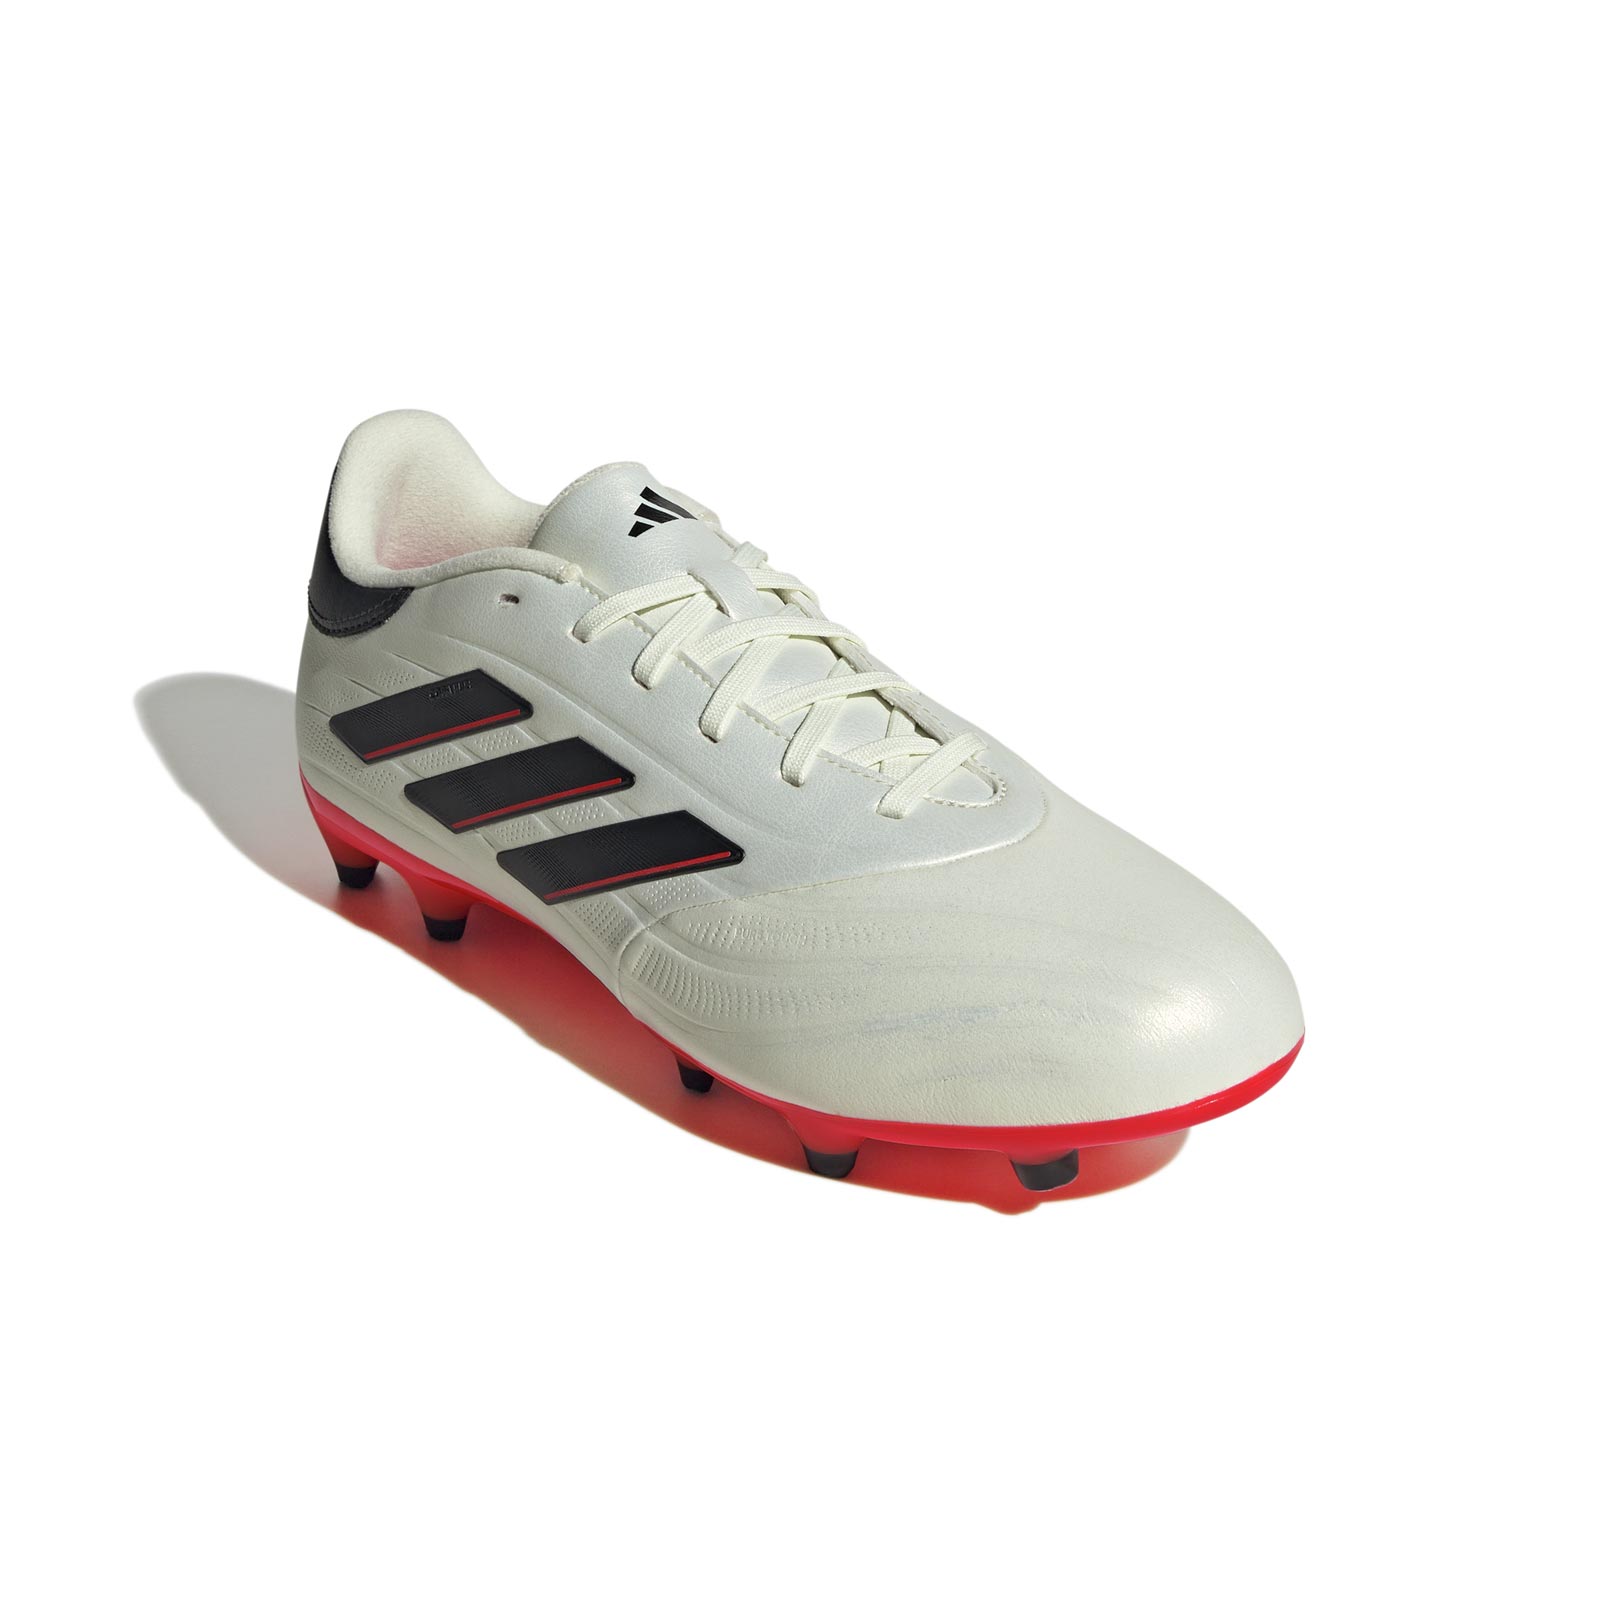 adidas Copa Pure 2 League Firm Ground Football Boots